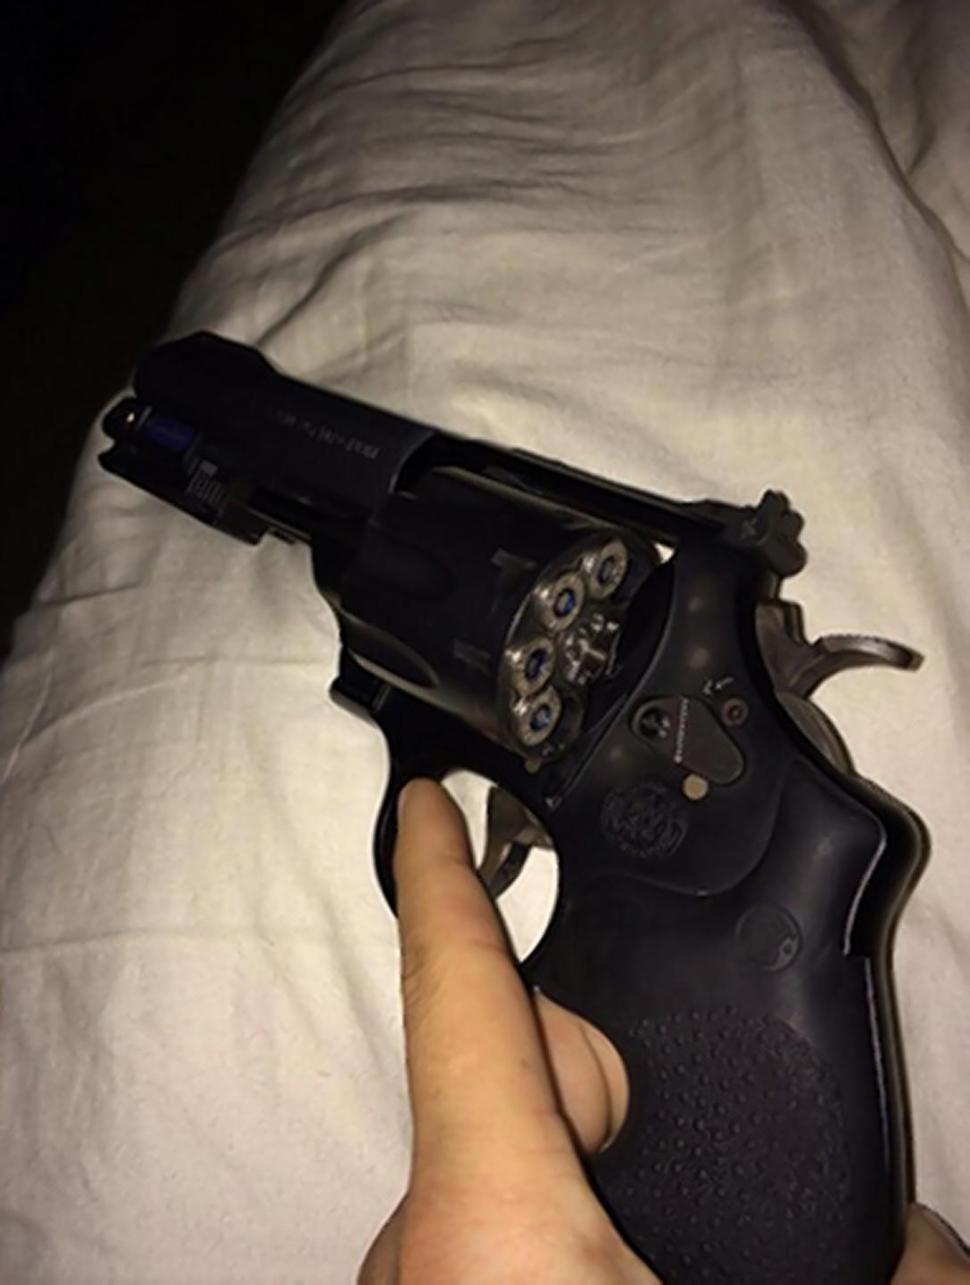 Mason Whitaker posted a series of gun and weapon pictures in June.